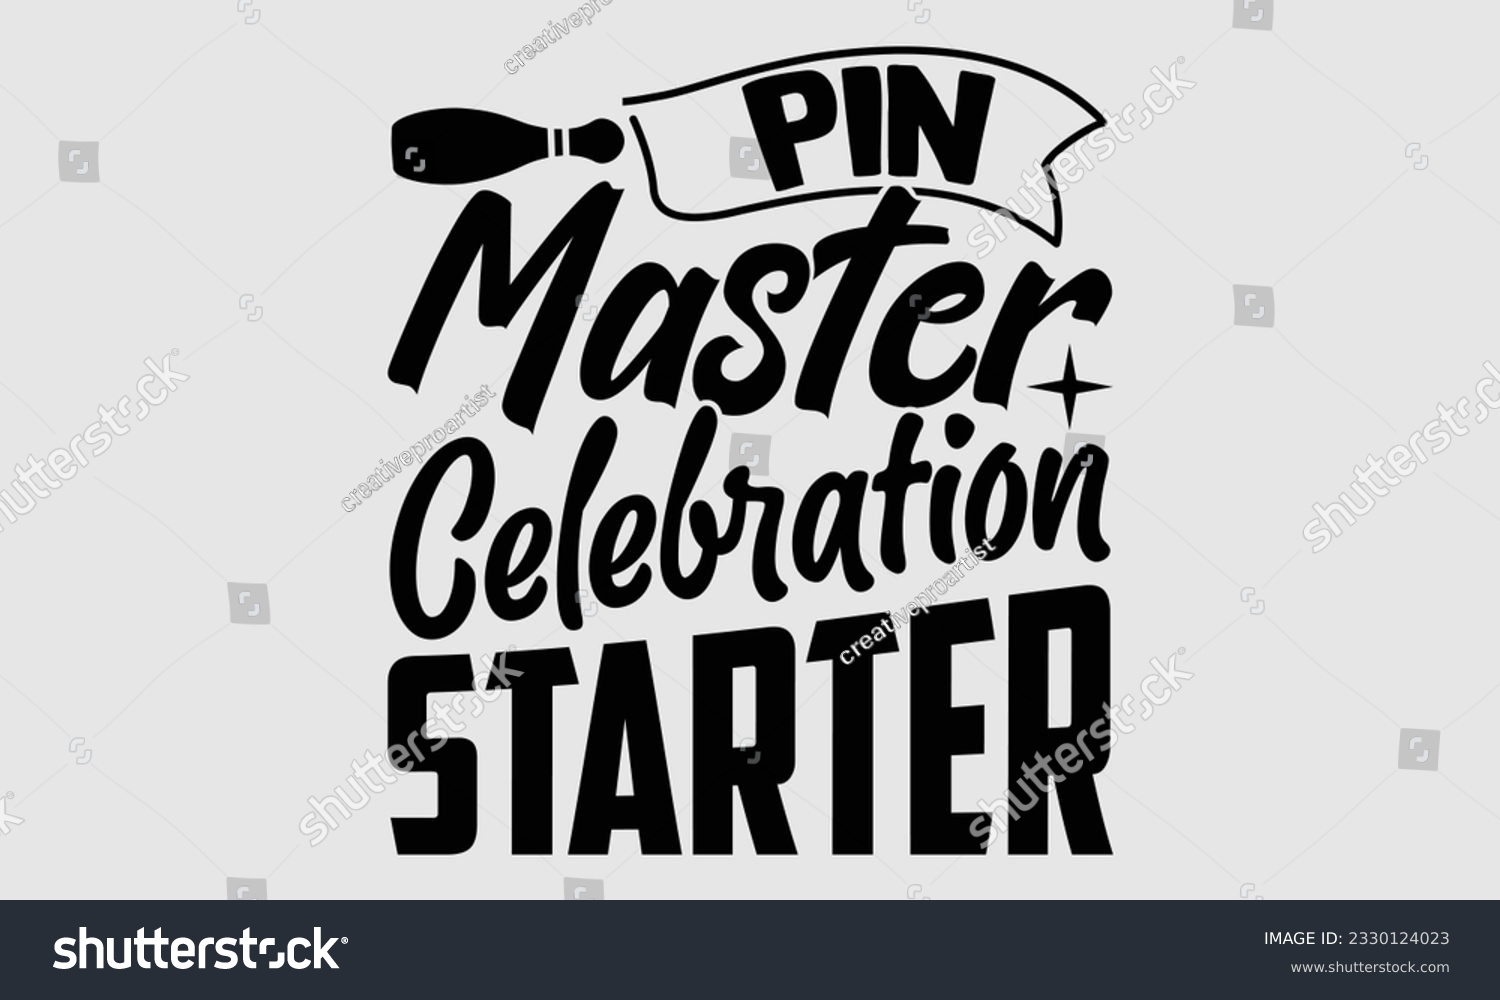 SVG of Pin Master Celebration Starter- Bowling t-shirt design, Illustration for prints on SVG and bags, posters, cards, greeting card template with typography text EPS svg